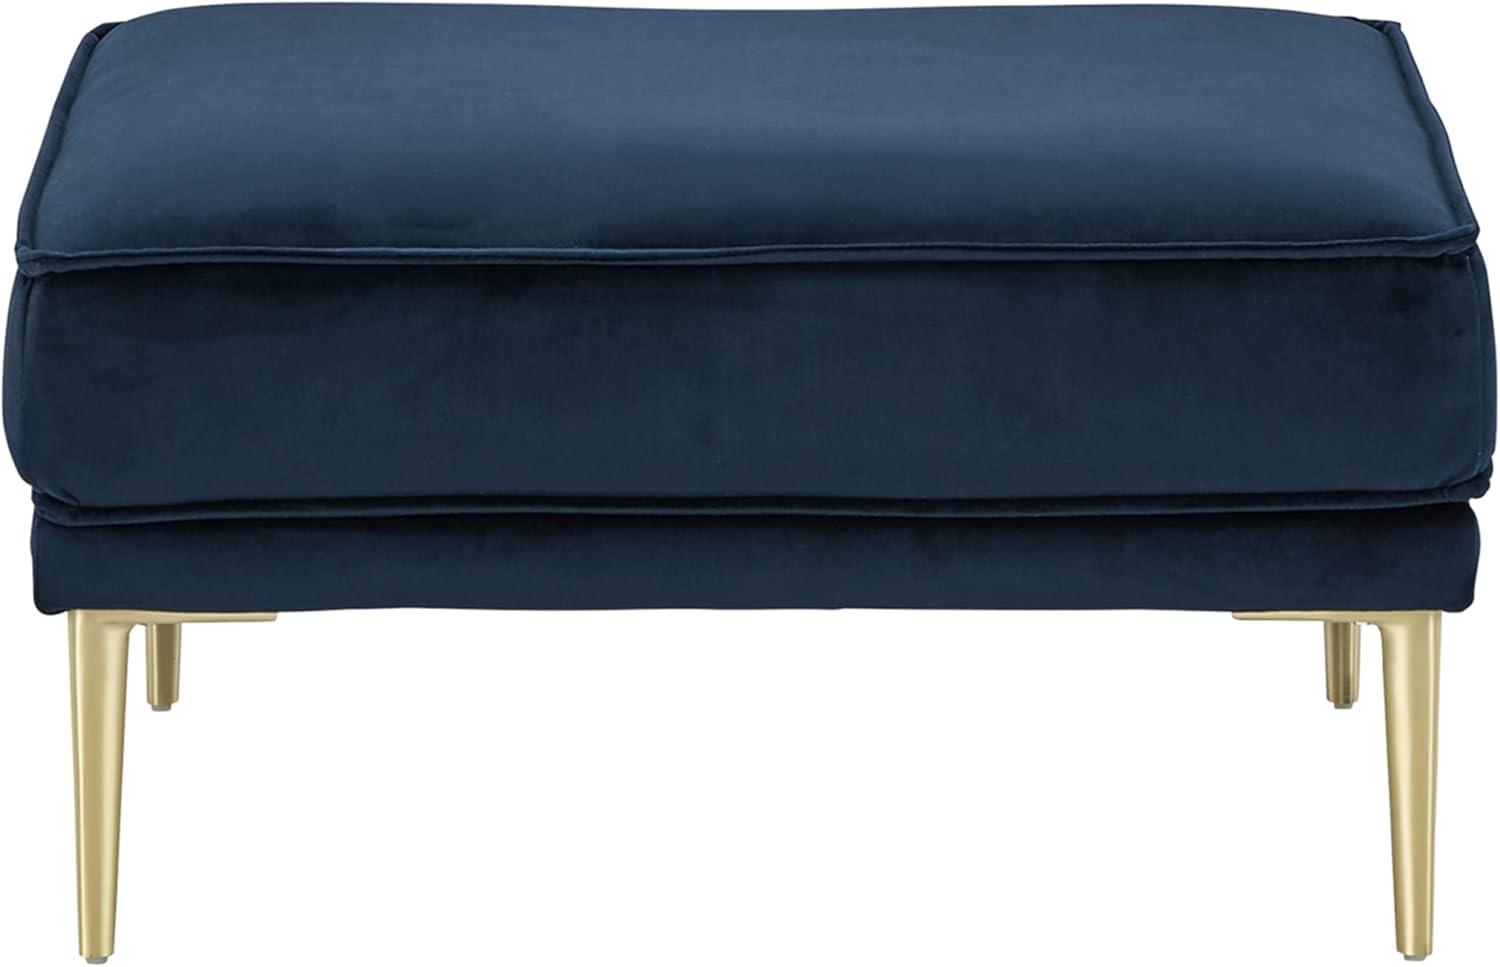 Macleary 29.5" Navy Blue Velvet Ottoman with Brass-Tone Metal Legs